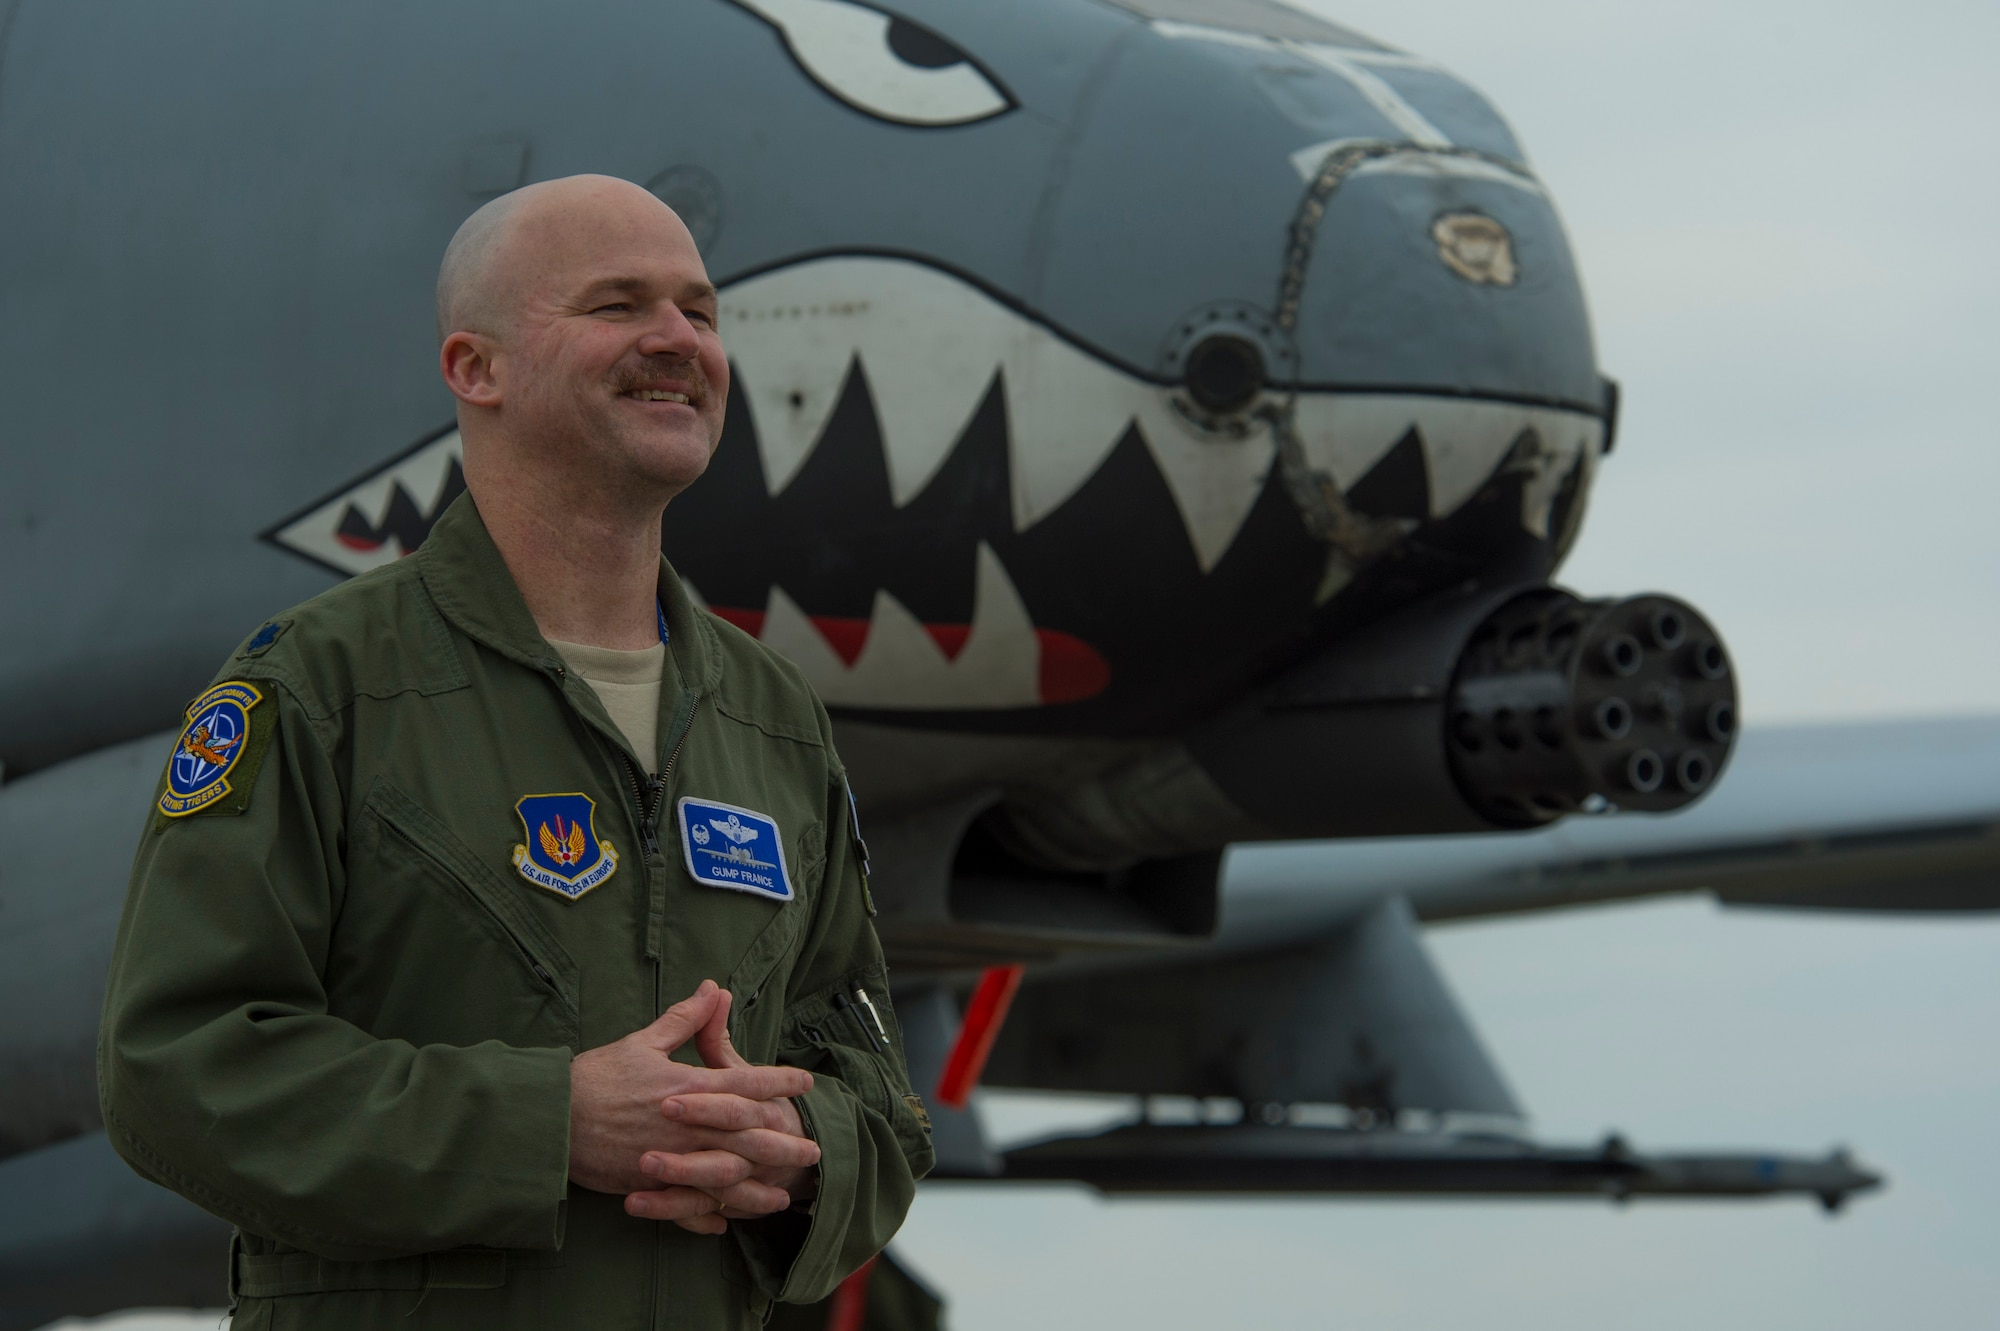 U.S. Air Force Lt. Col. Bryan France, 74th Expeditionary Fighter Squadron commander, speaks during a media interview next to a U.S. Air Force A-10 Thunderbolt II during the 74th EFS’s deployment in support of Operation Atlantic Resolve at Graf Ignatievo, Bulgaria, March 16, 2016. Approximately 350 Airmen from Moody Air Force Base, Ga., and Spangdahlem Air Base, Germany, deployed for six months to train alongside NATO allies to strengthen interoperability and to demonstrate U.S. commitment to the security and stability of Europe.  (U.S. Air Force photo by Staff Sgt. Joe W. McFadden/Released)